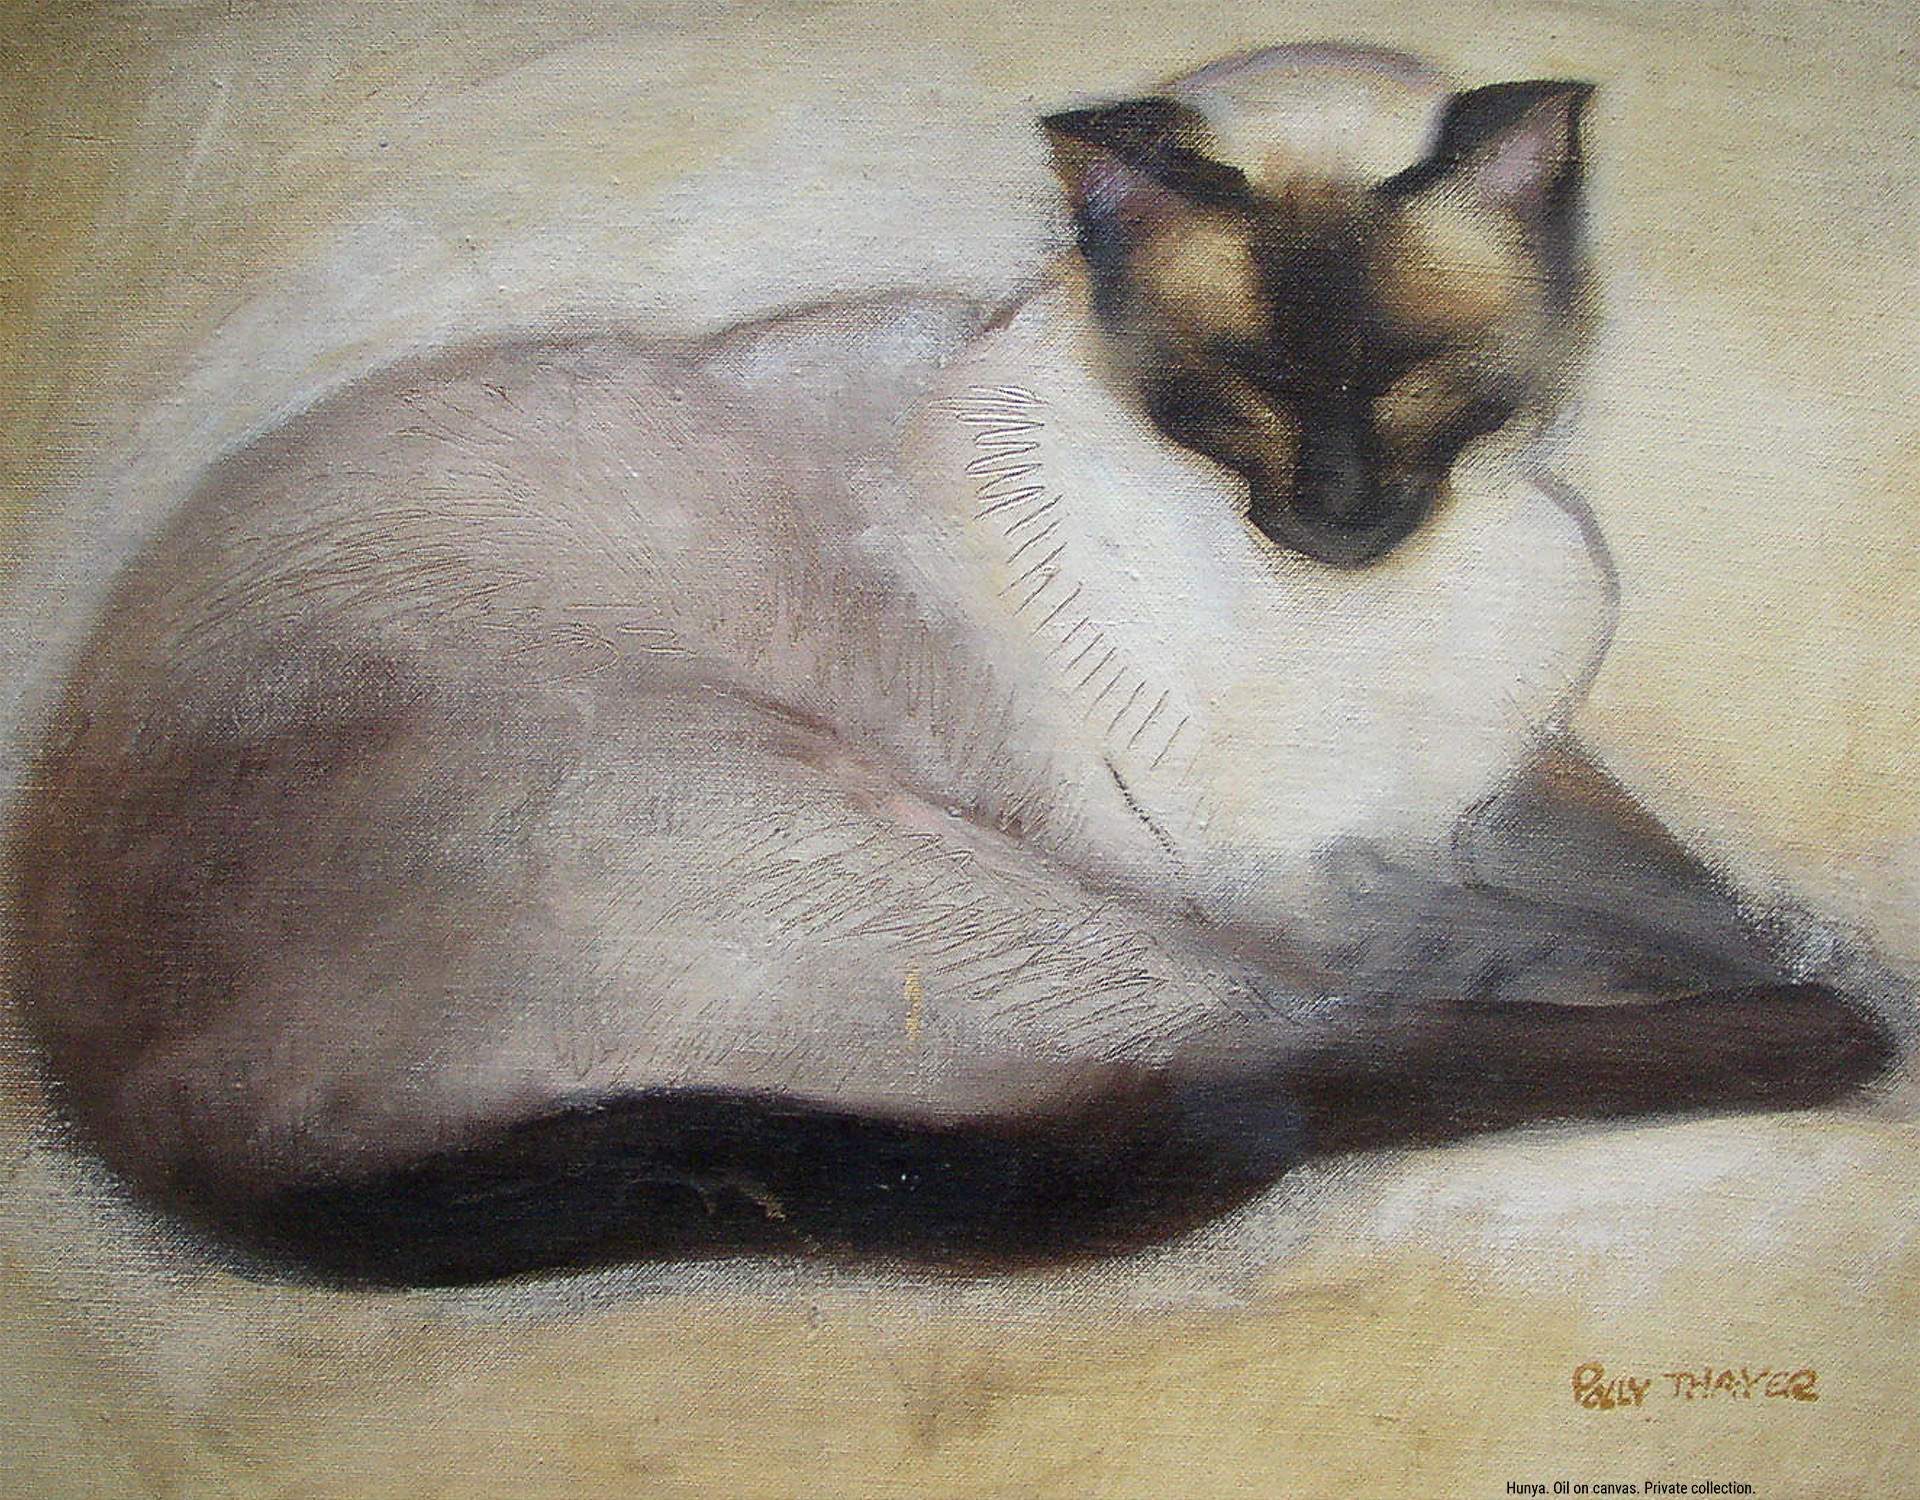 Hunya. Oil on canvas. Private collection.